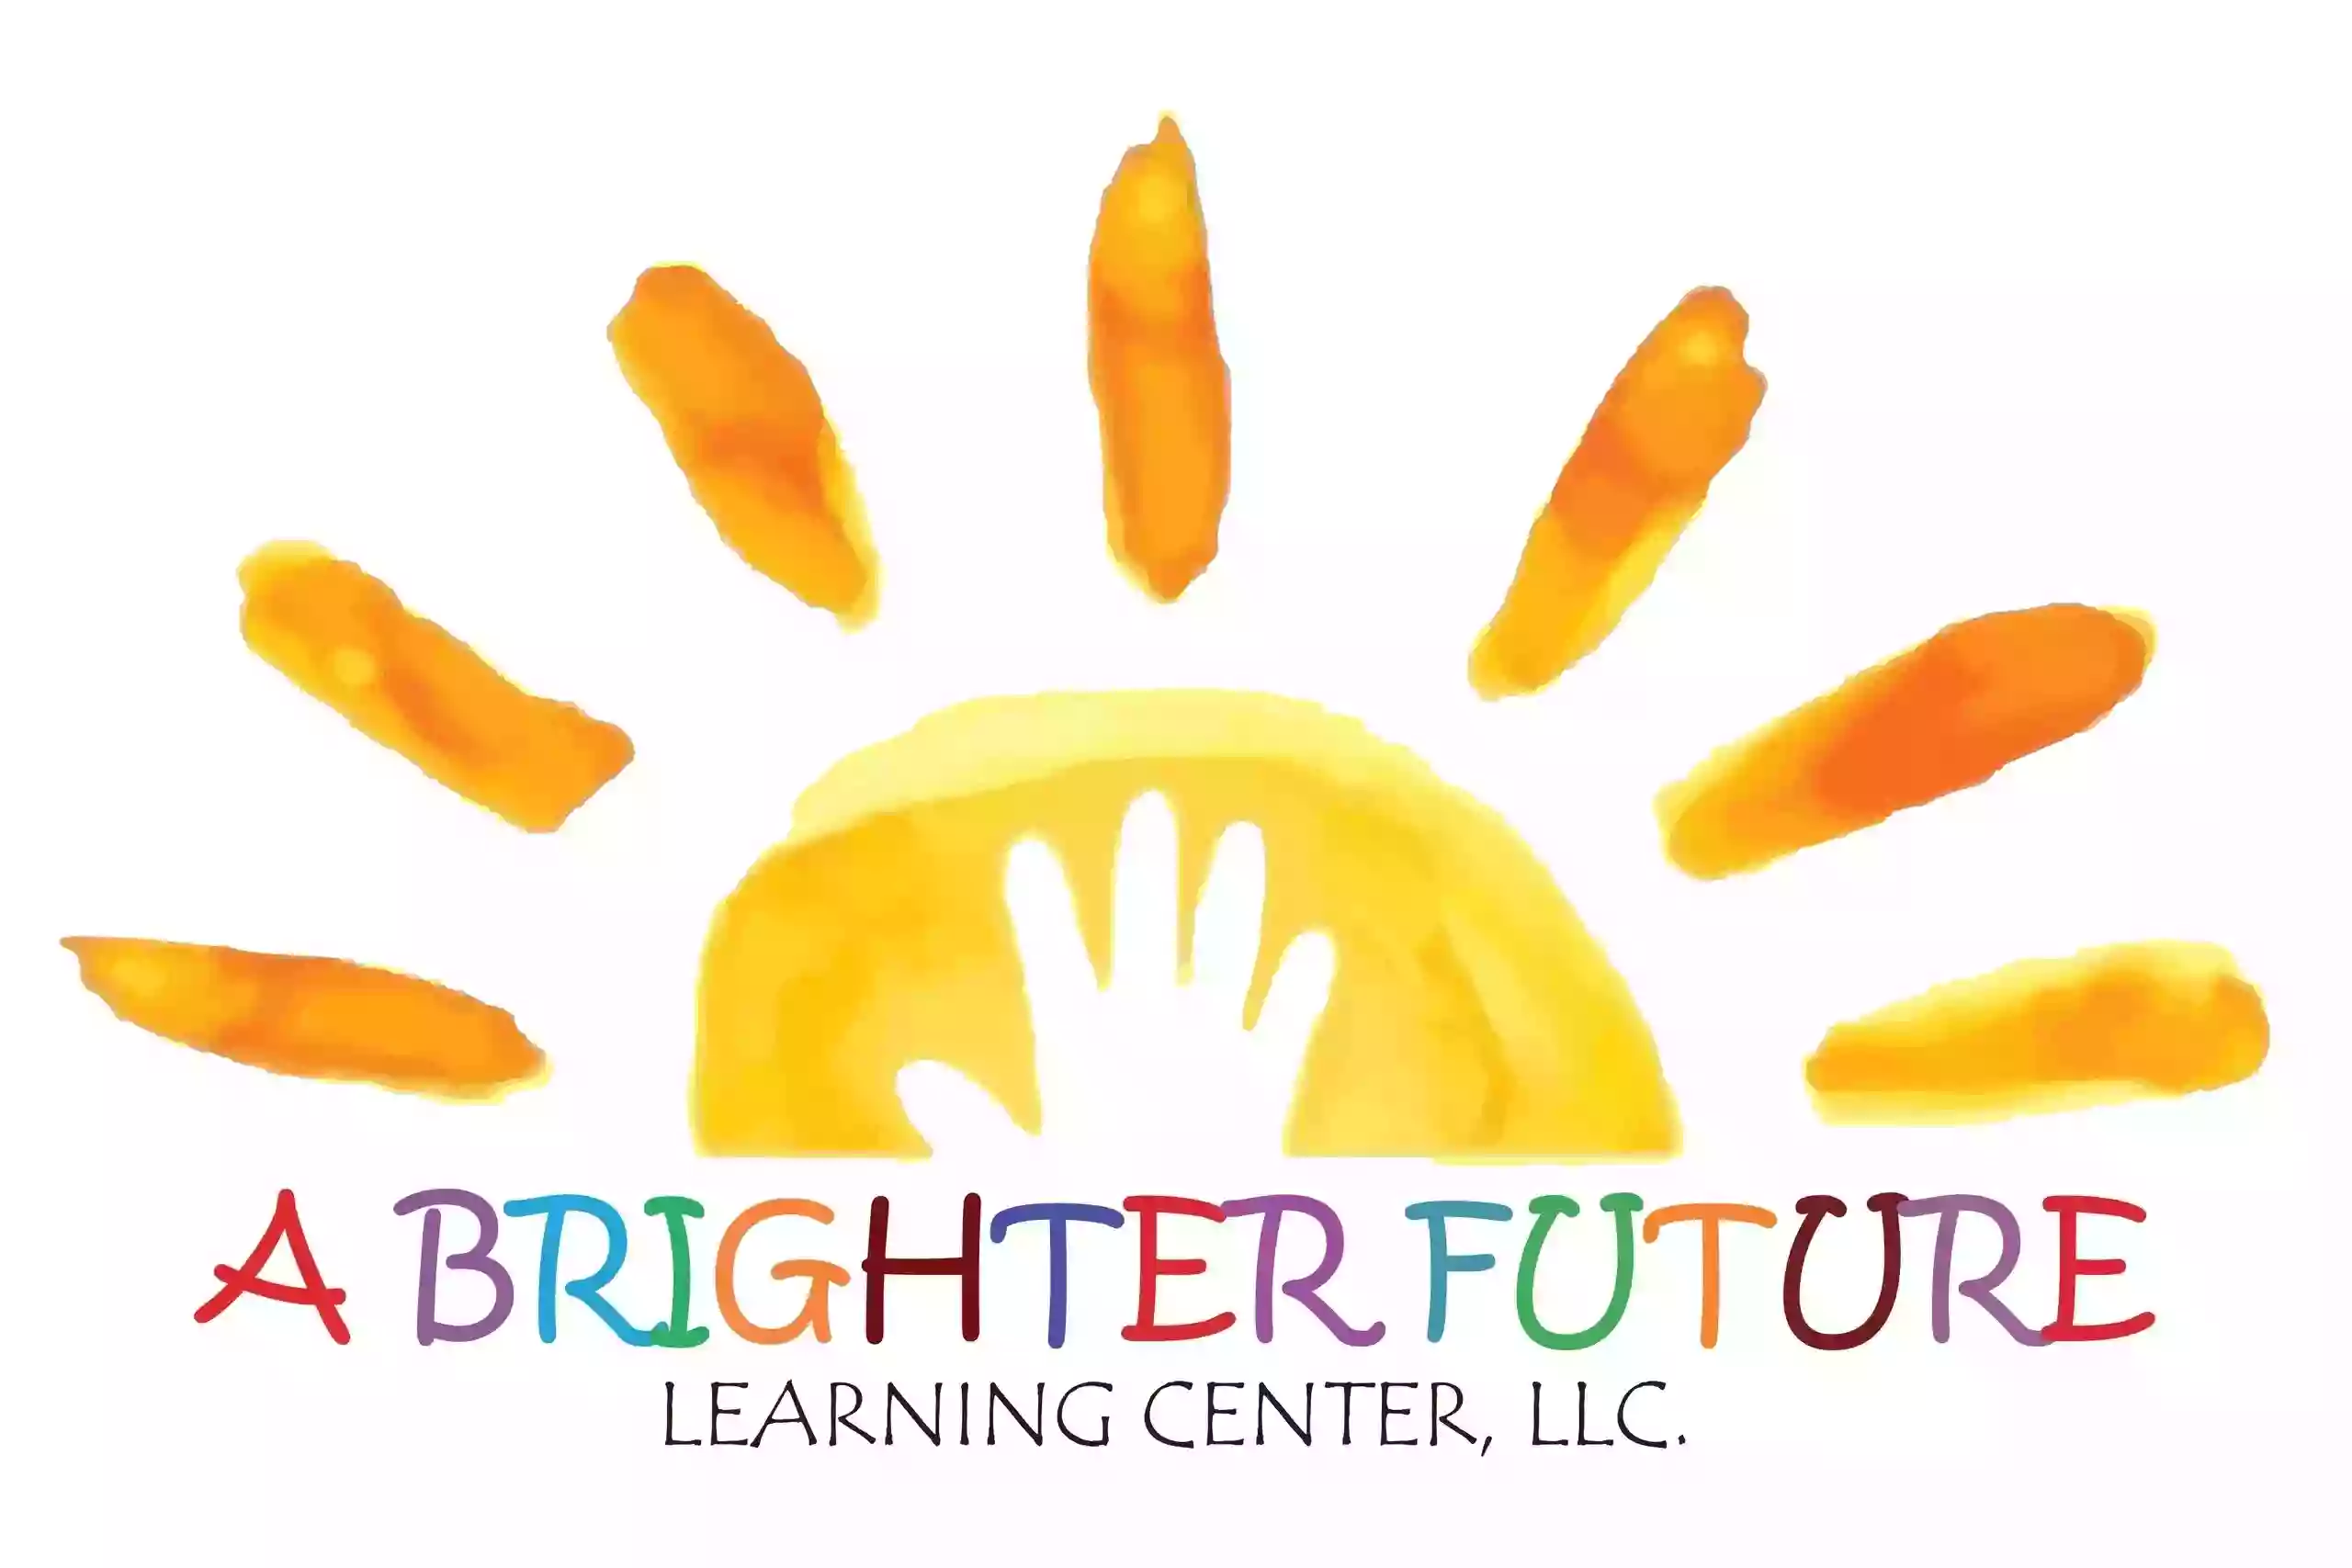 A Brighter Future Learning Center